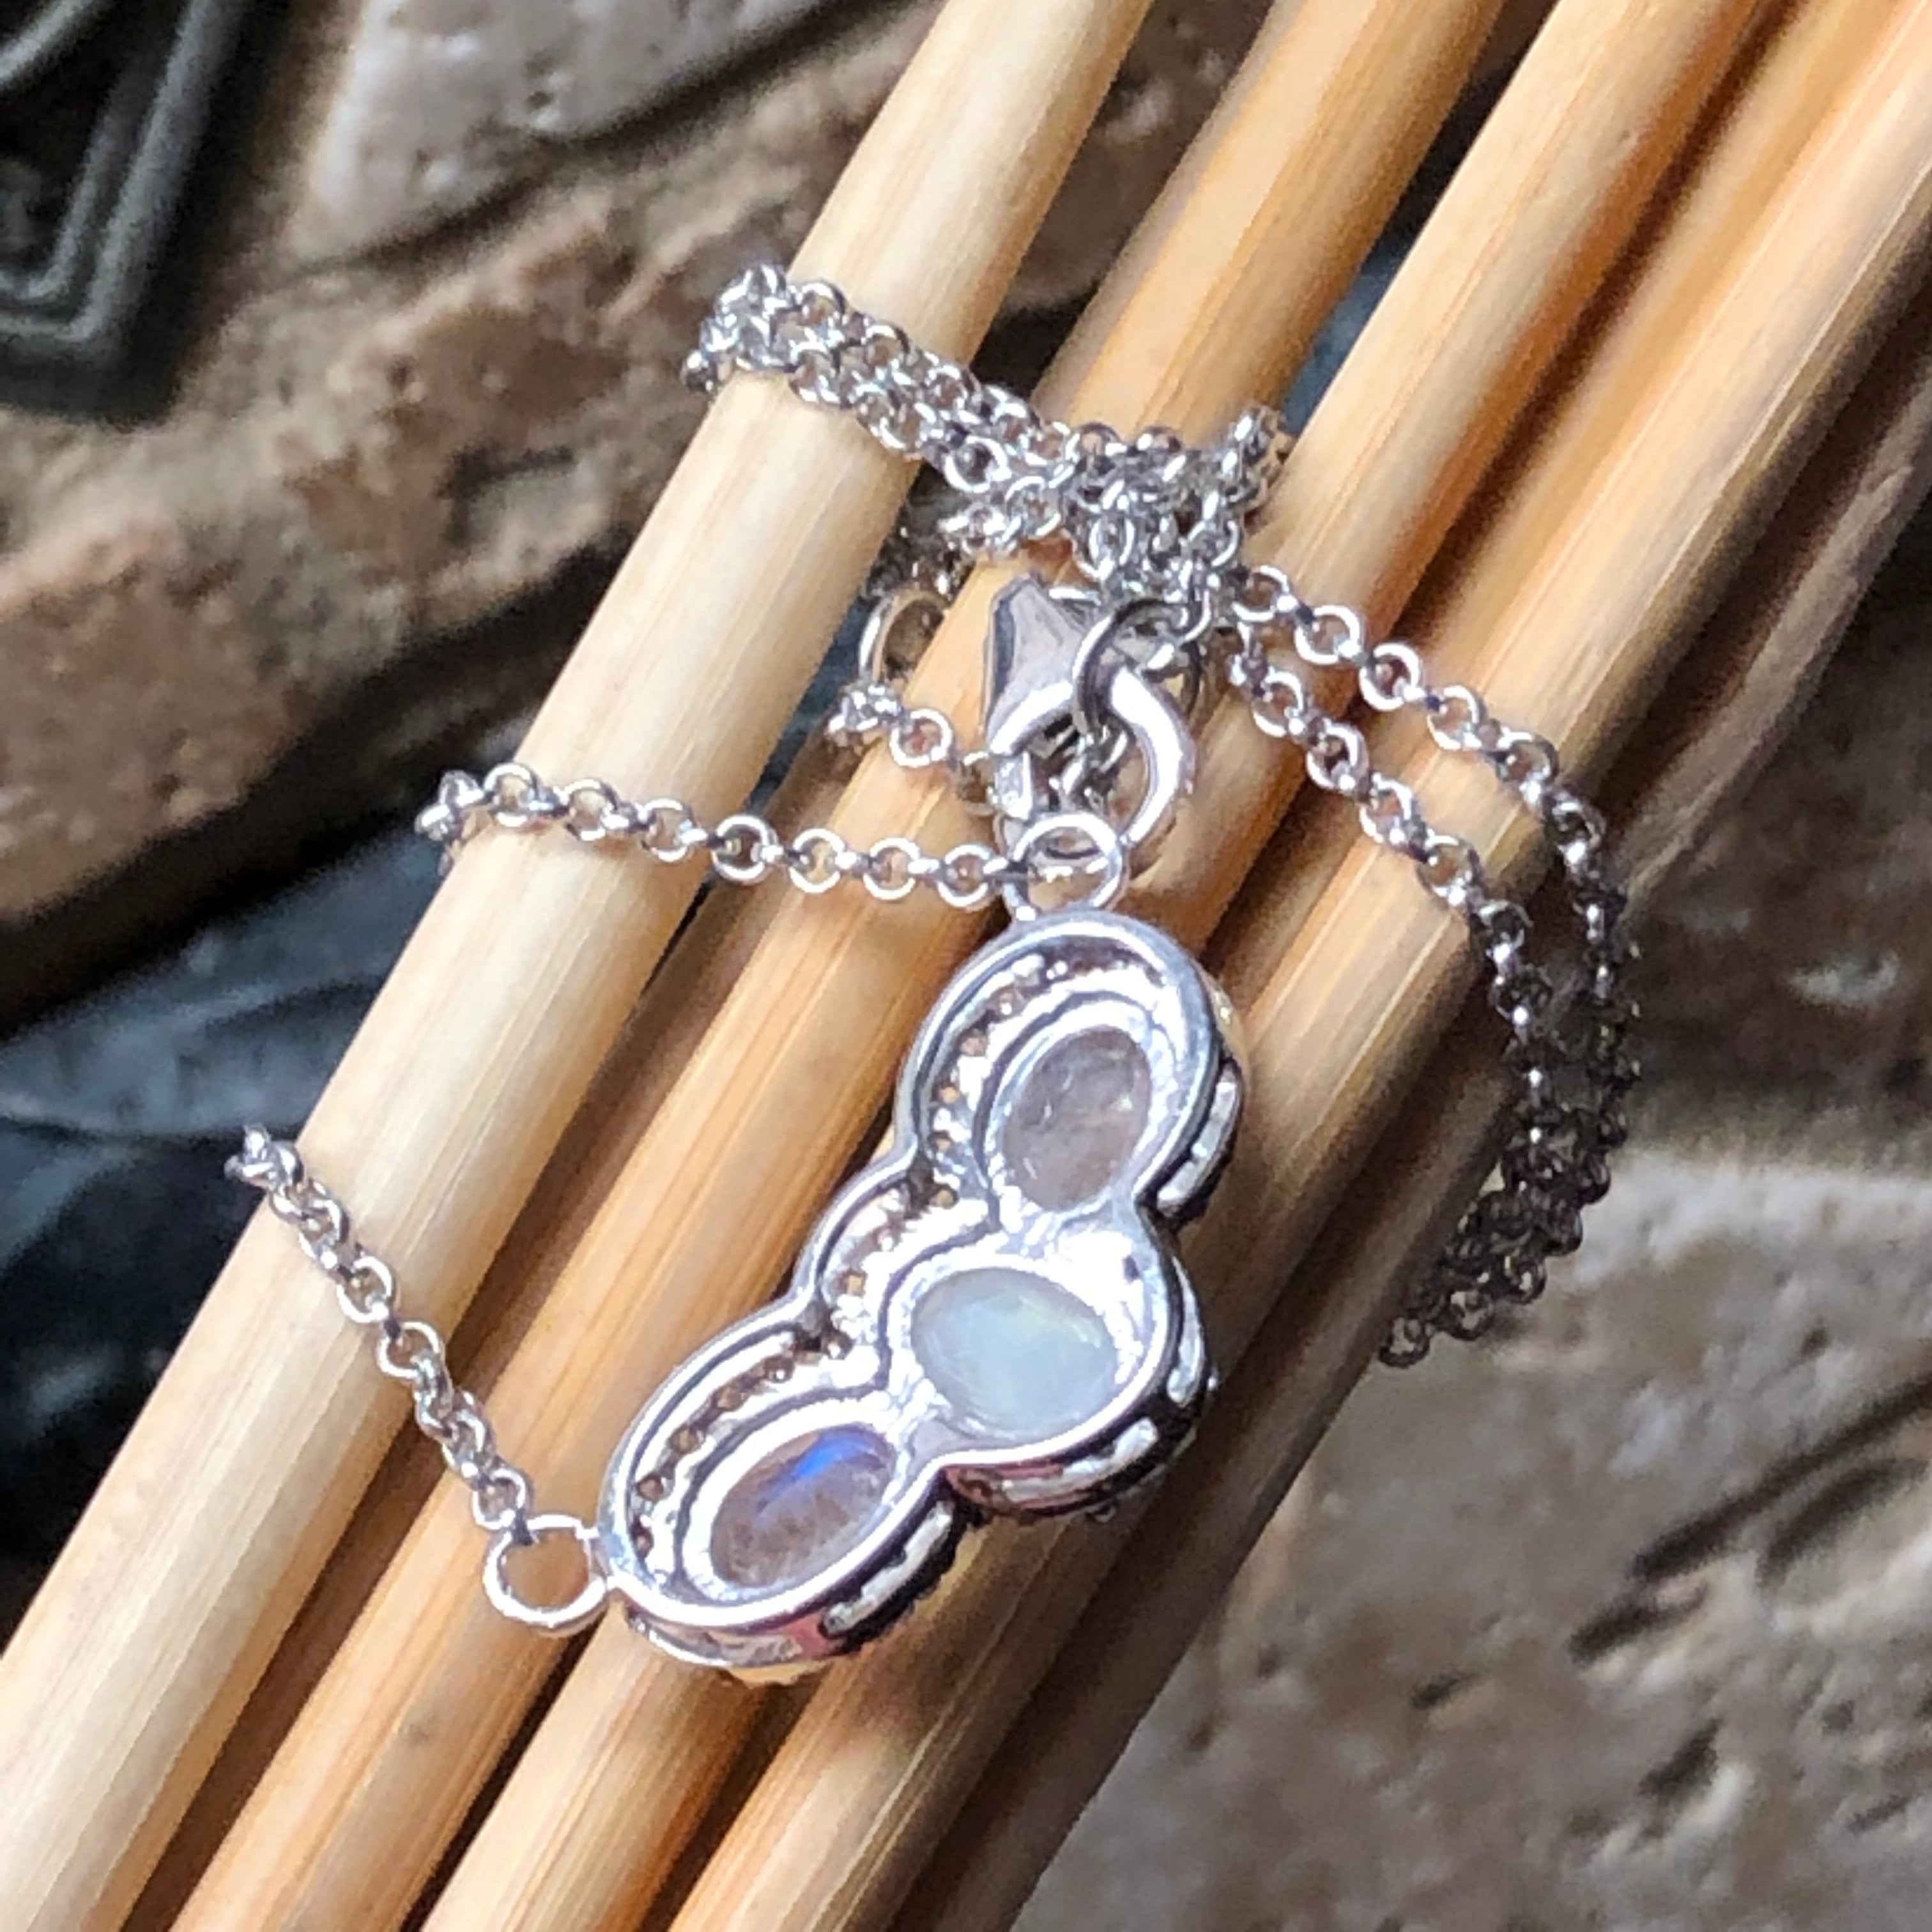 Heart Lock Necklace With Natural White Sapphire